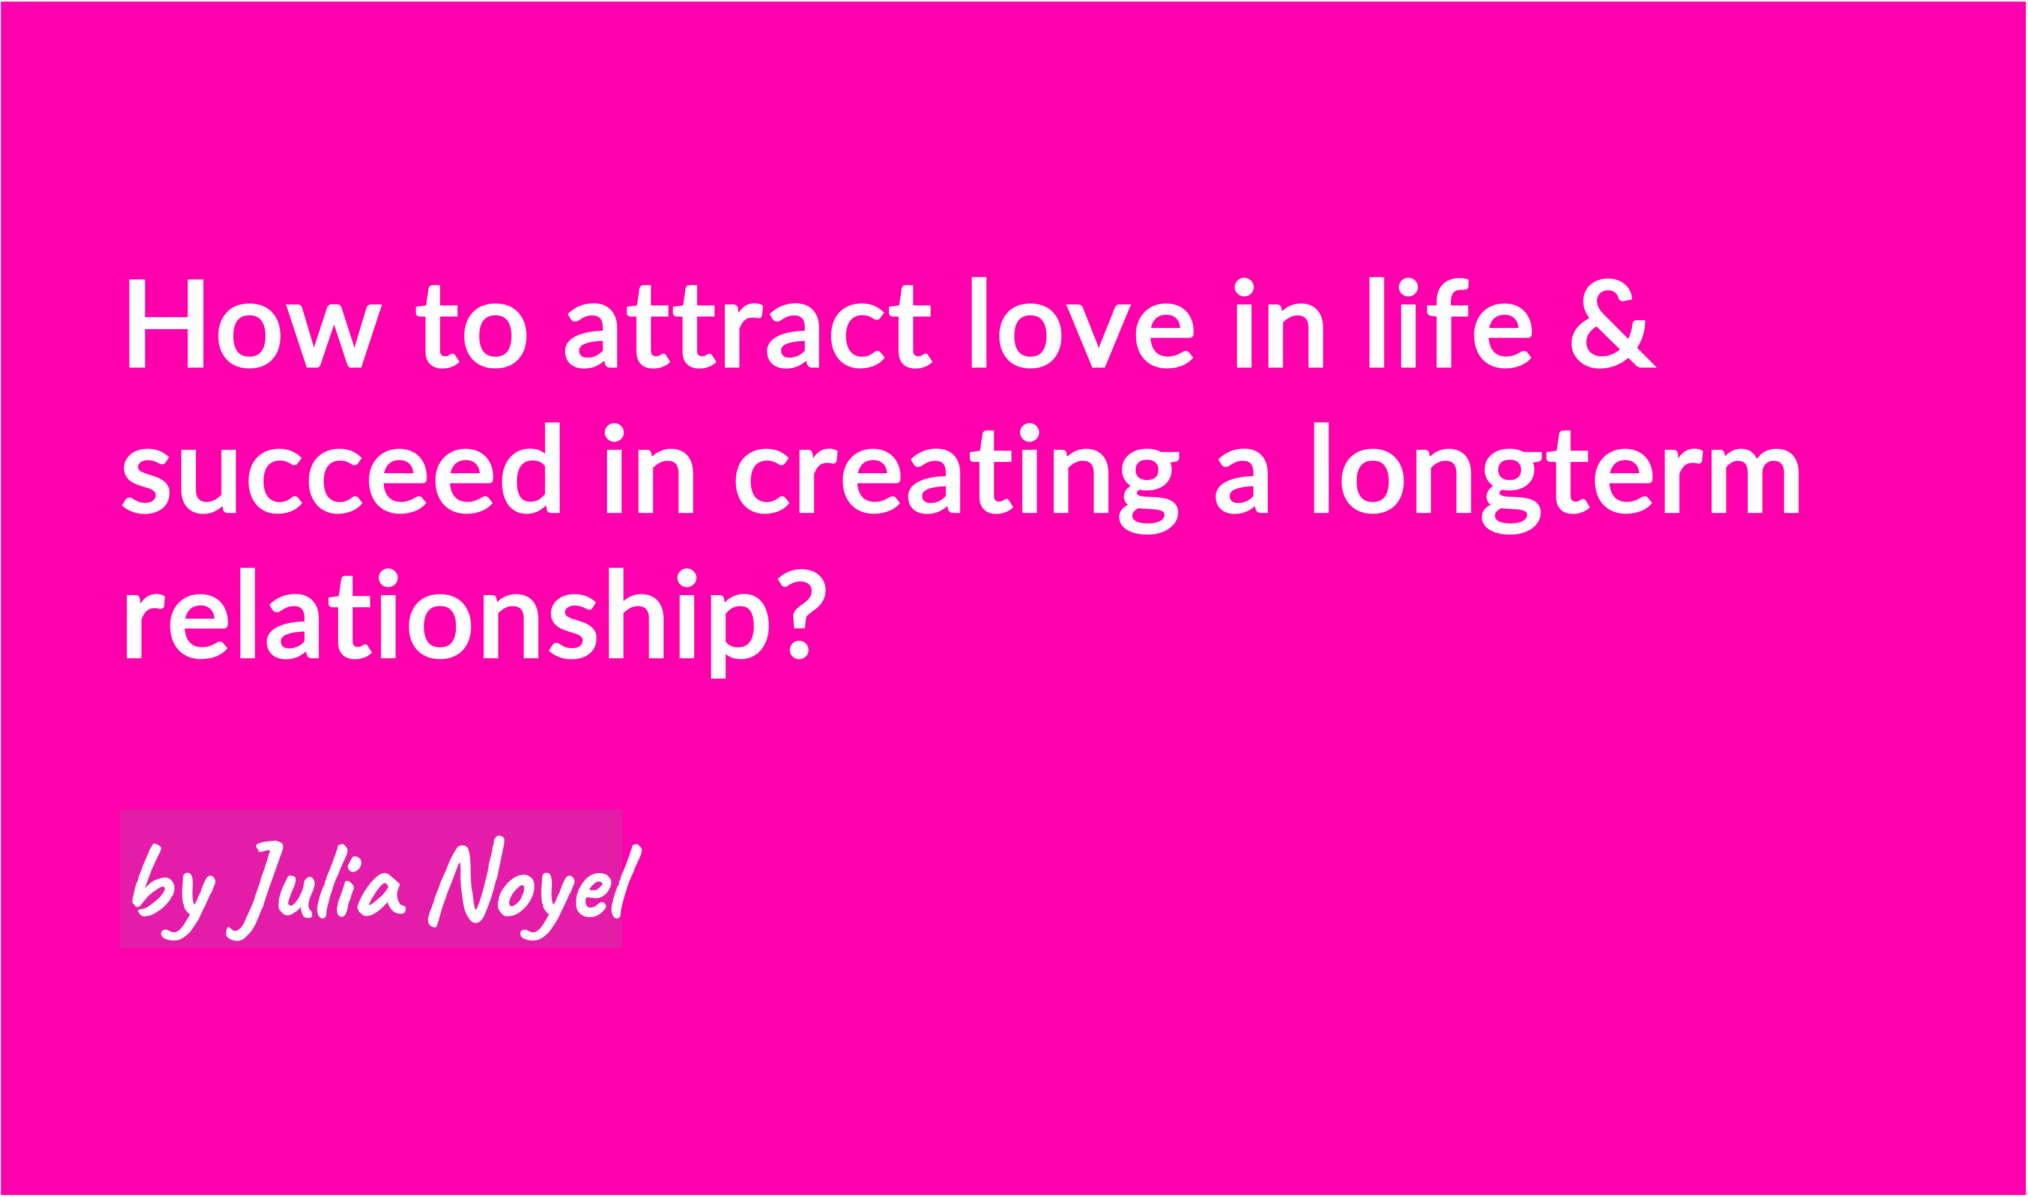 How to attract love in life & succeed in creating a longterm relationship? by Julia Noyel